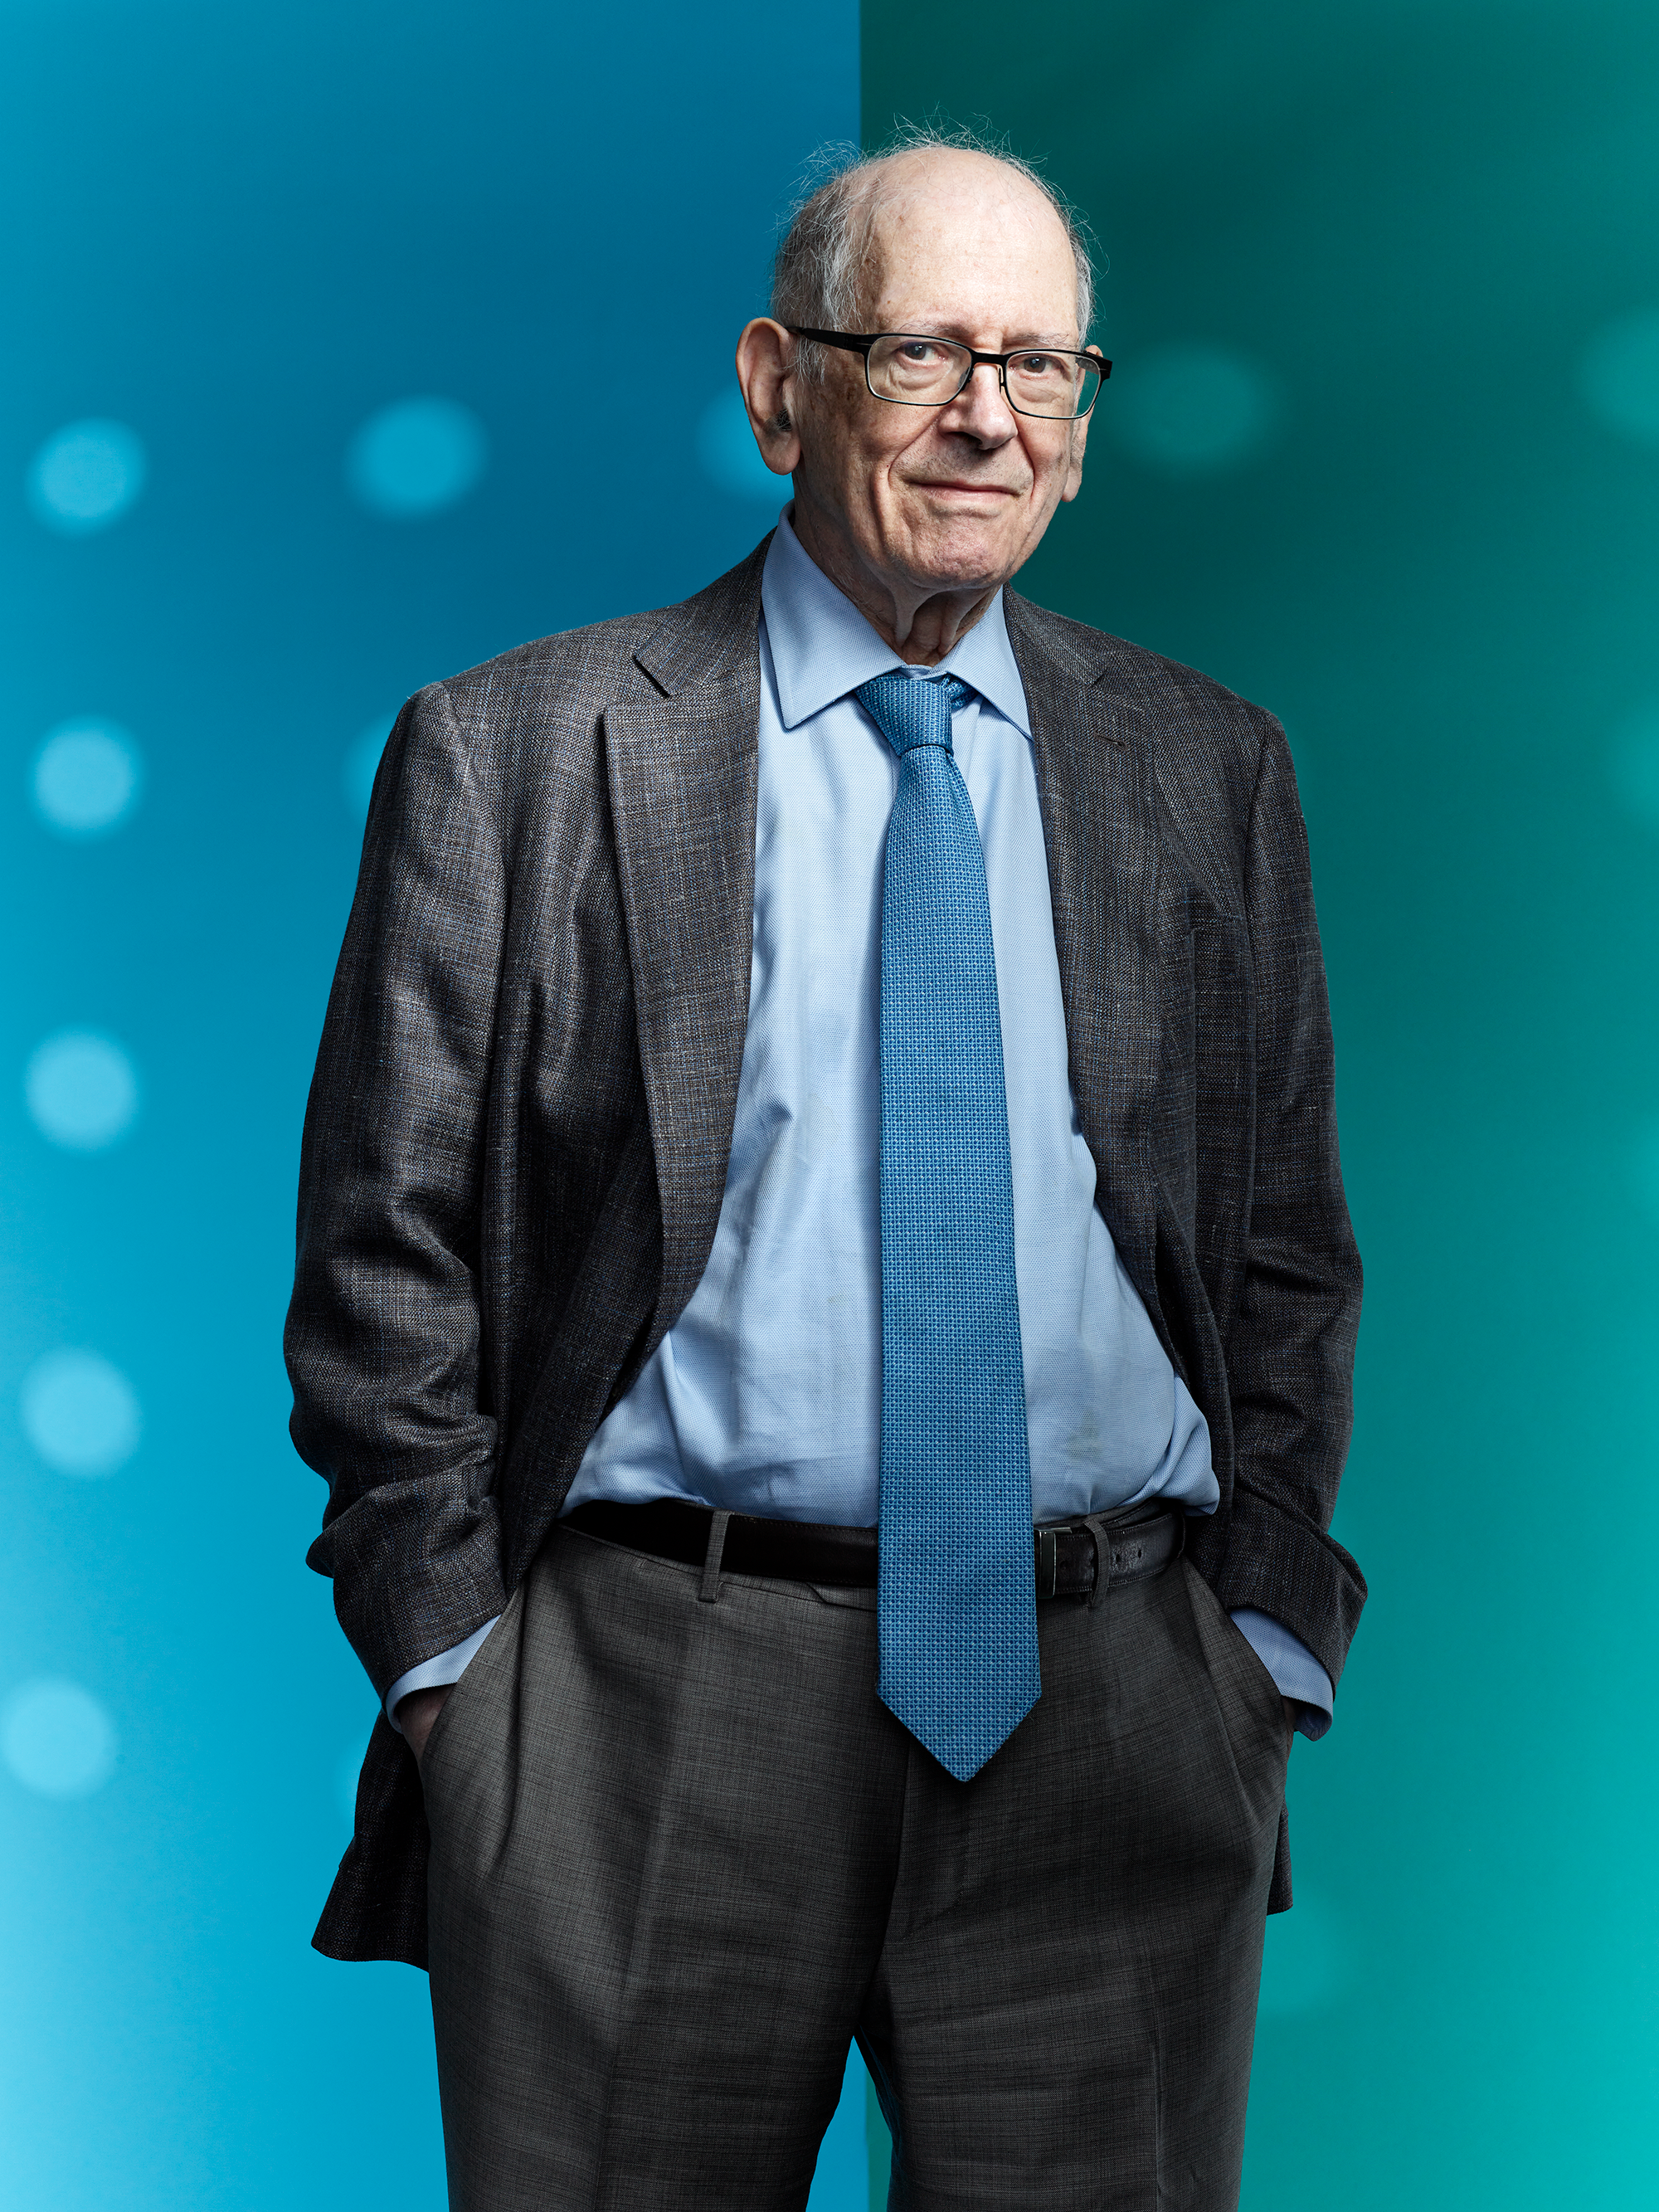 Photo of an older man in a dark suit in front of a blue and green background